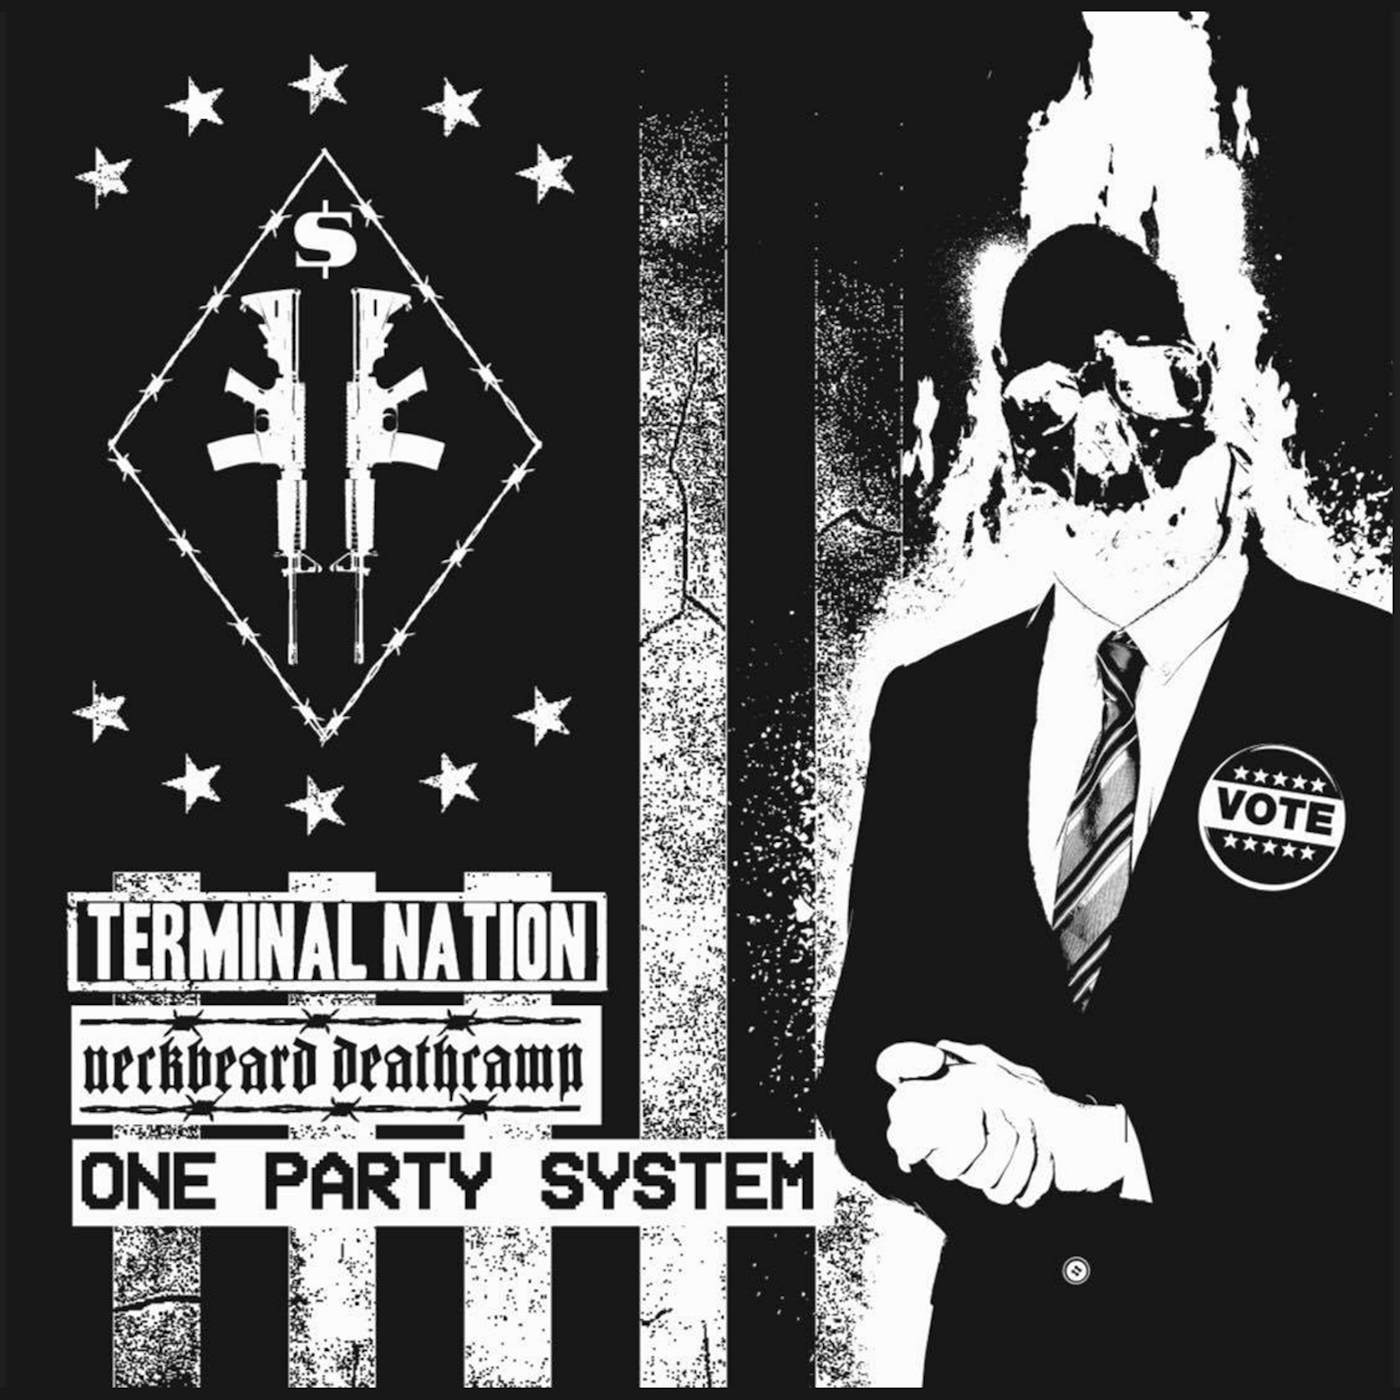 Terminal Nation One Party System Vinyl Record